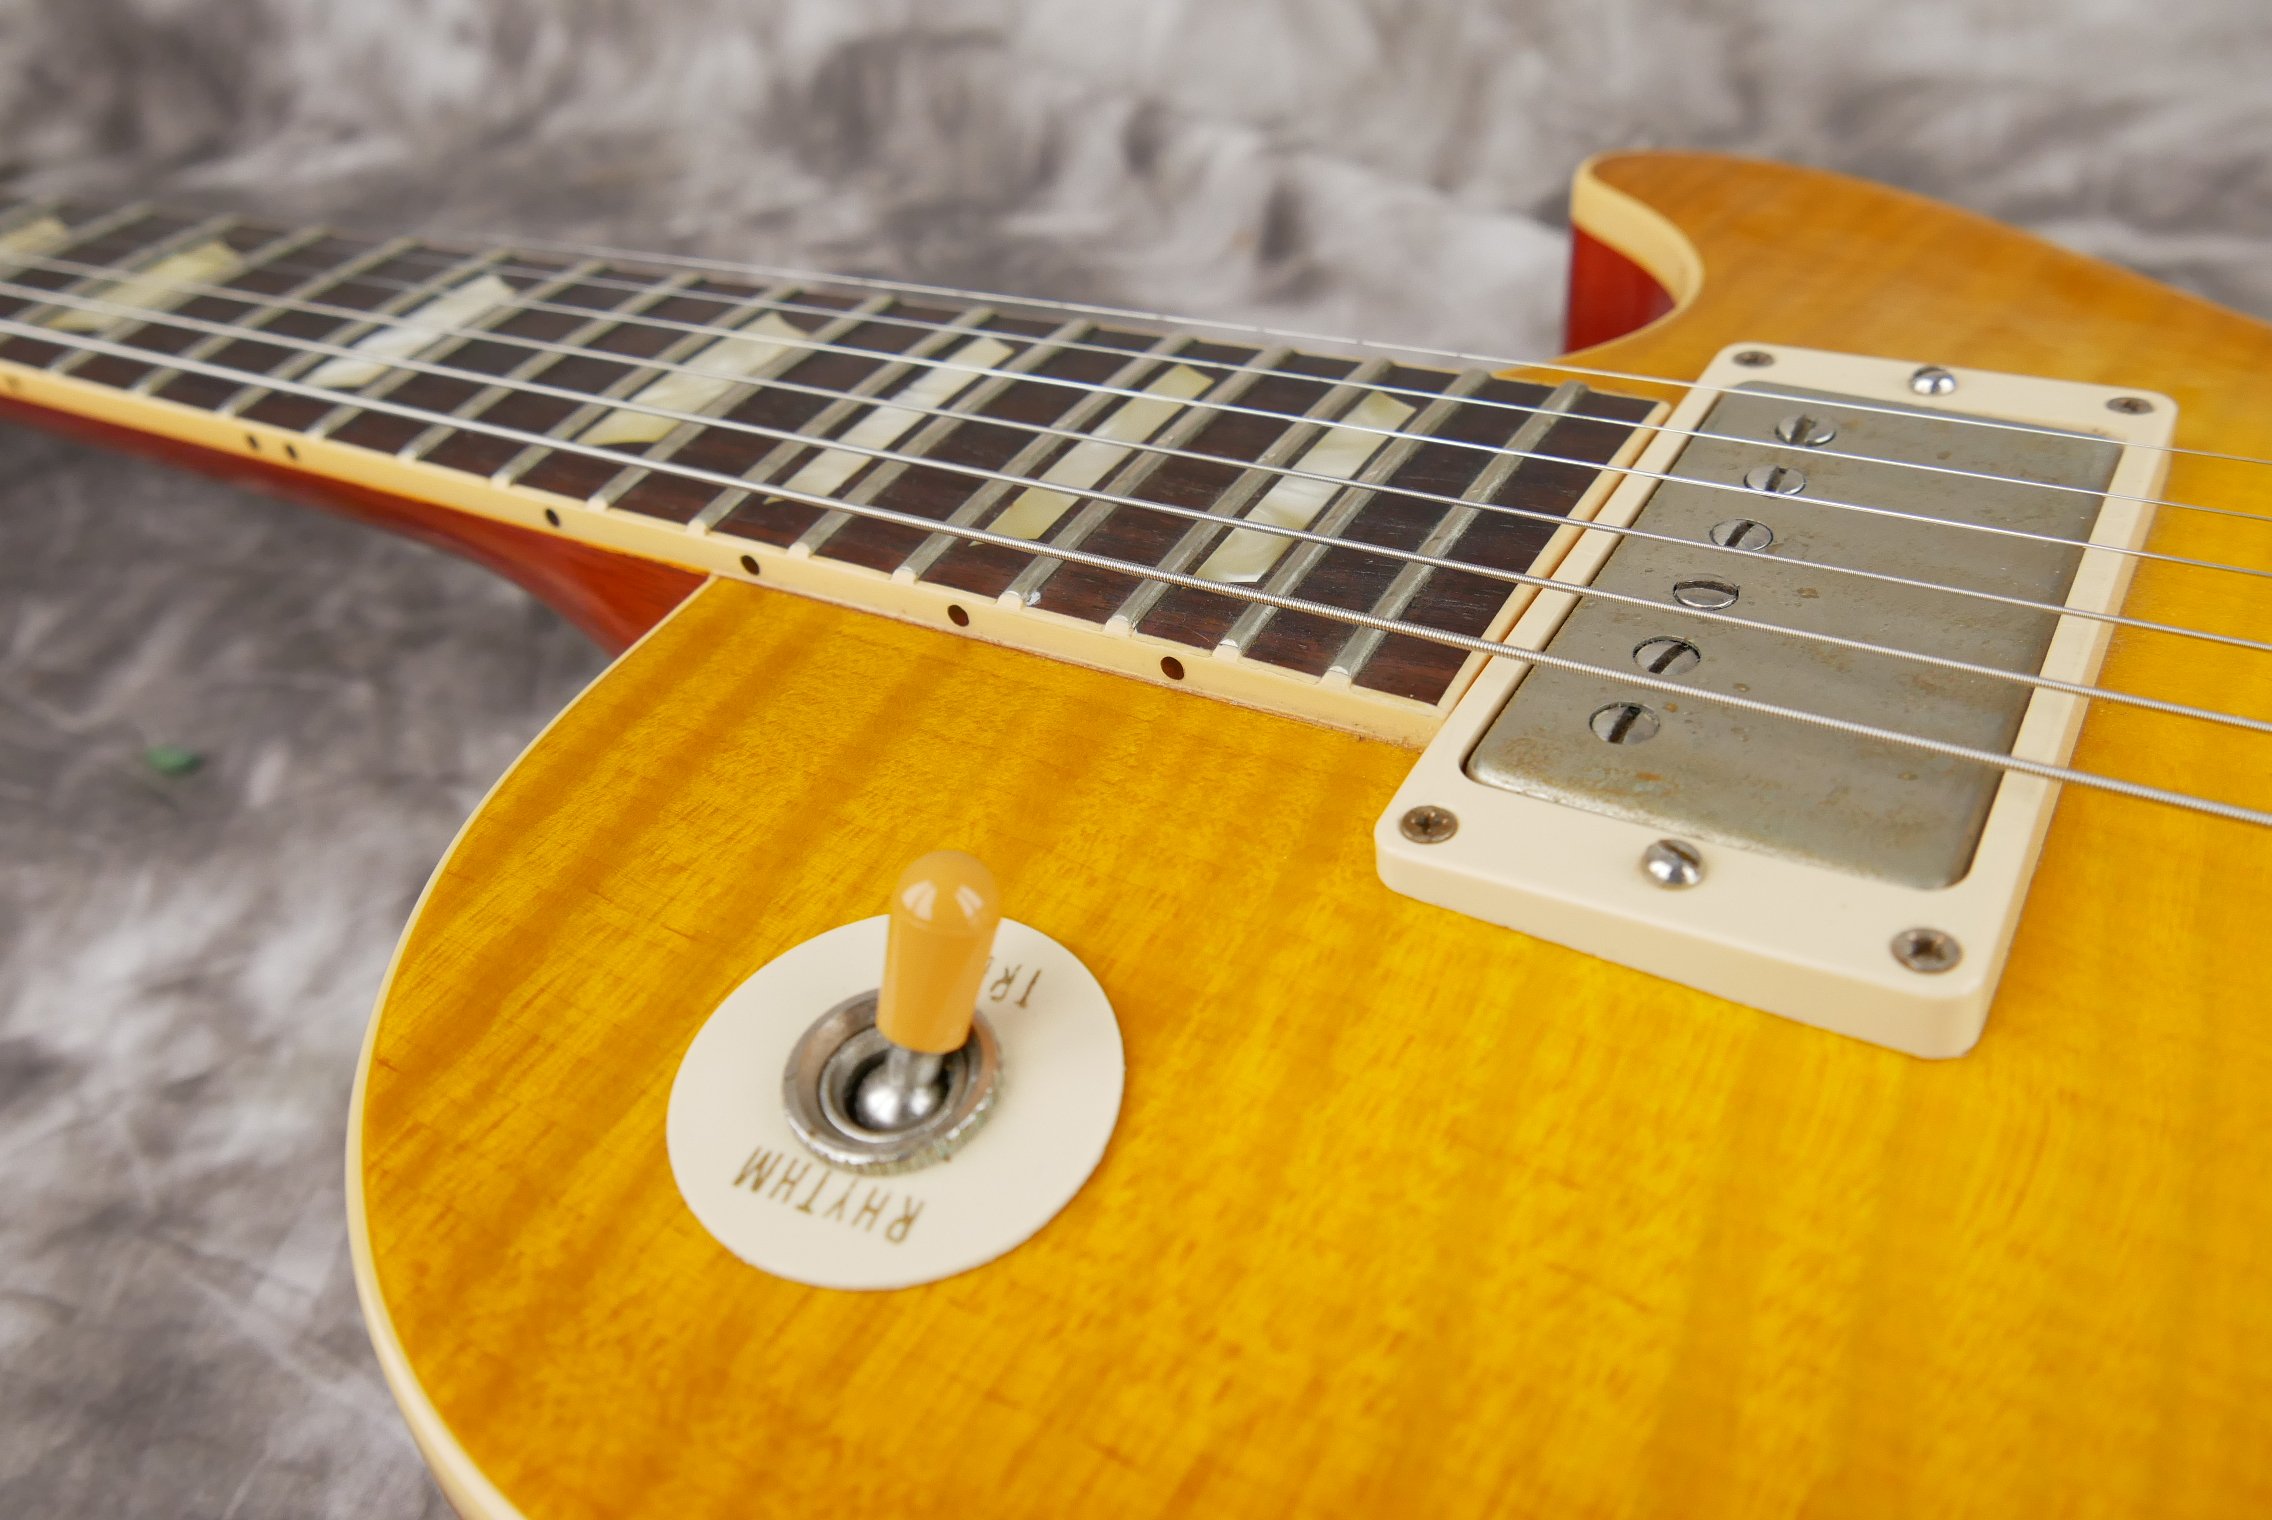 Gibson-Les-Paul-Kossoff-VOS-limited-edition-2012-016.JPG